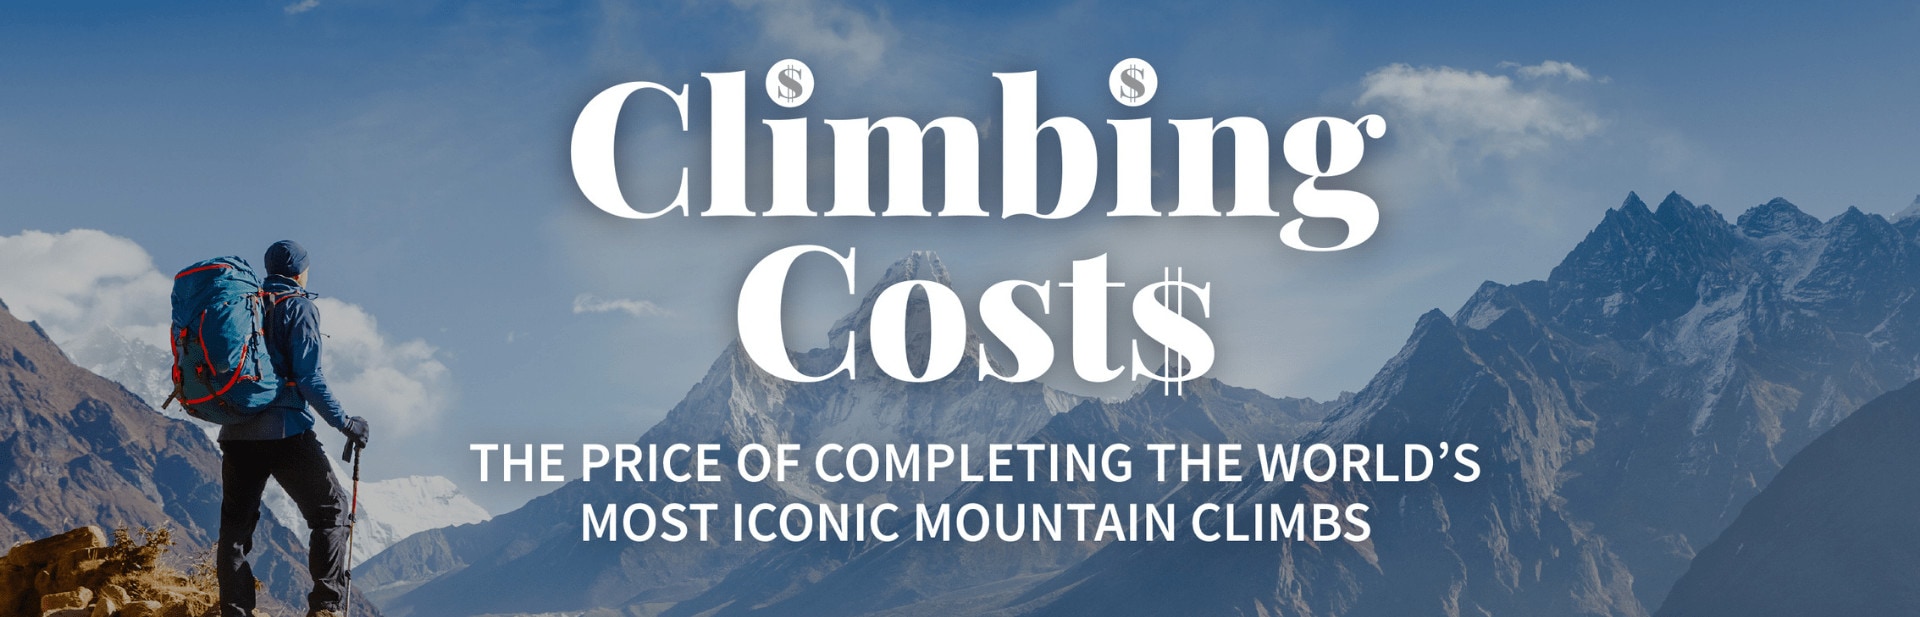 Climbing Costs: The price of completing the world’s most iconic mountain climbs